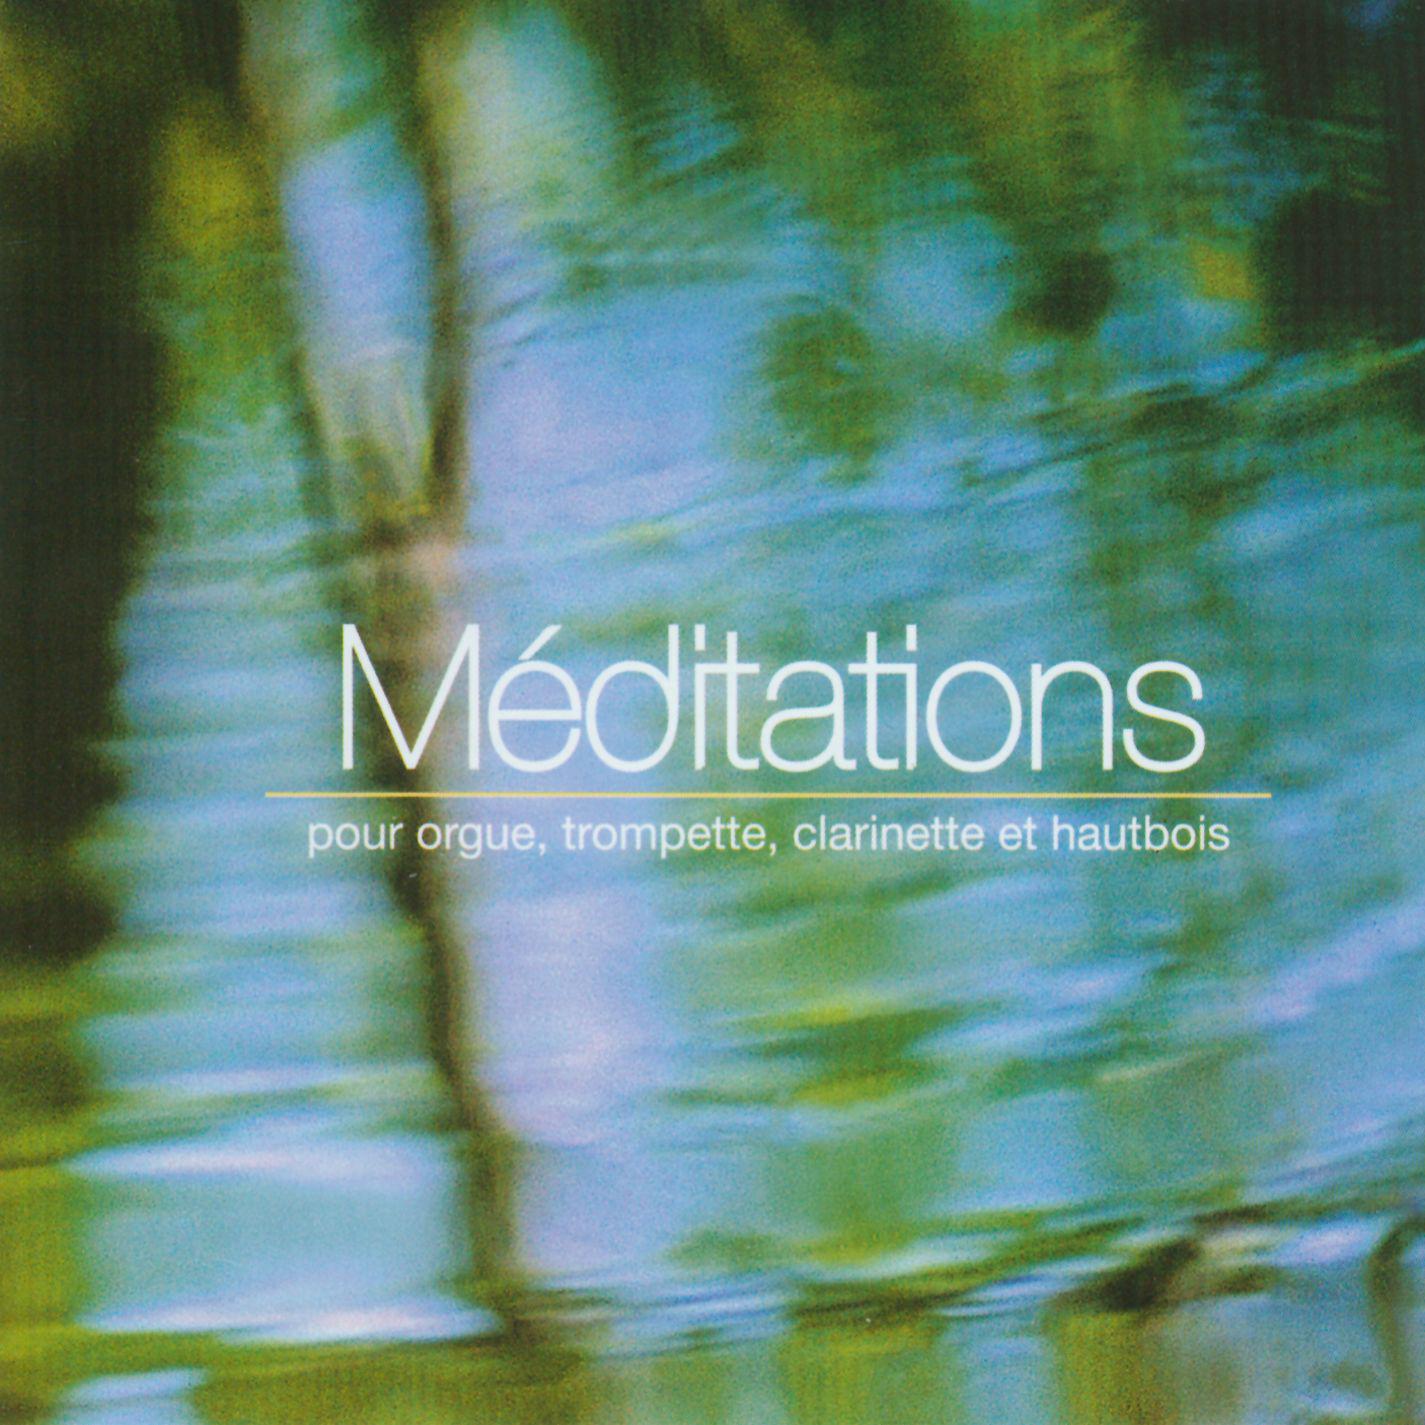 Meditations for Organ, Trumpet, Clarinet and Oboe